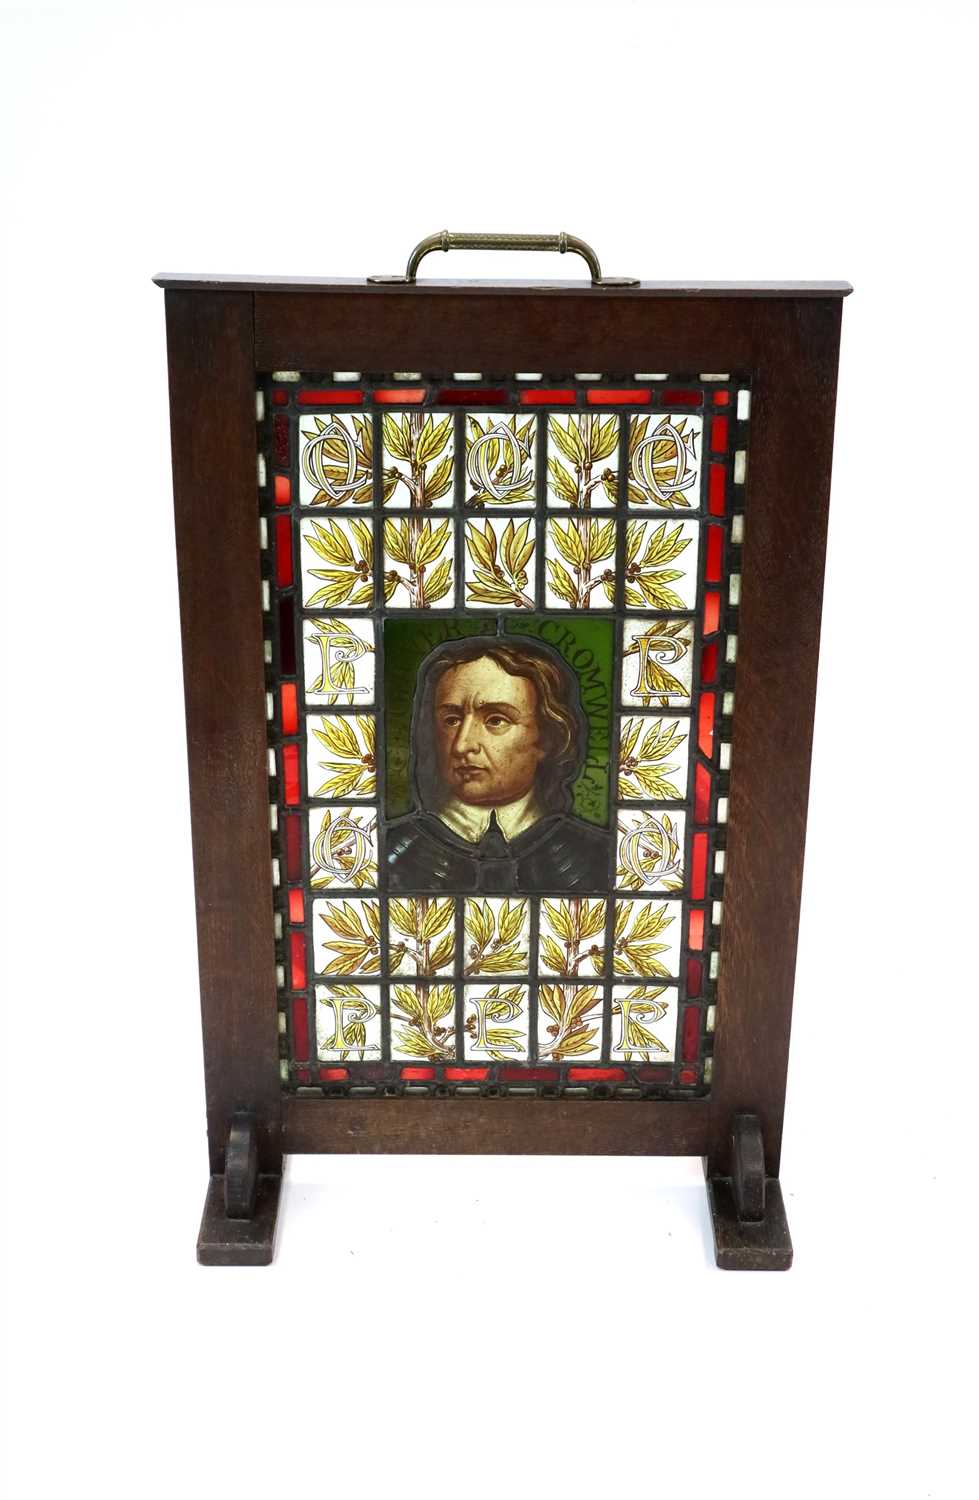 Lot 246 - A decorative 19th century oak framed stained glass panel / screen portrait of Oliver Cromwell